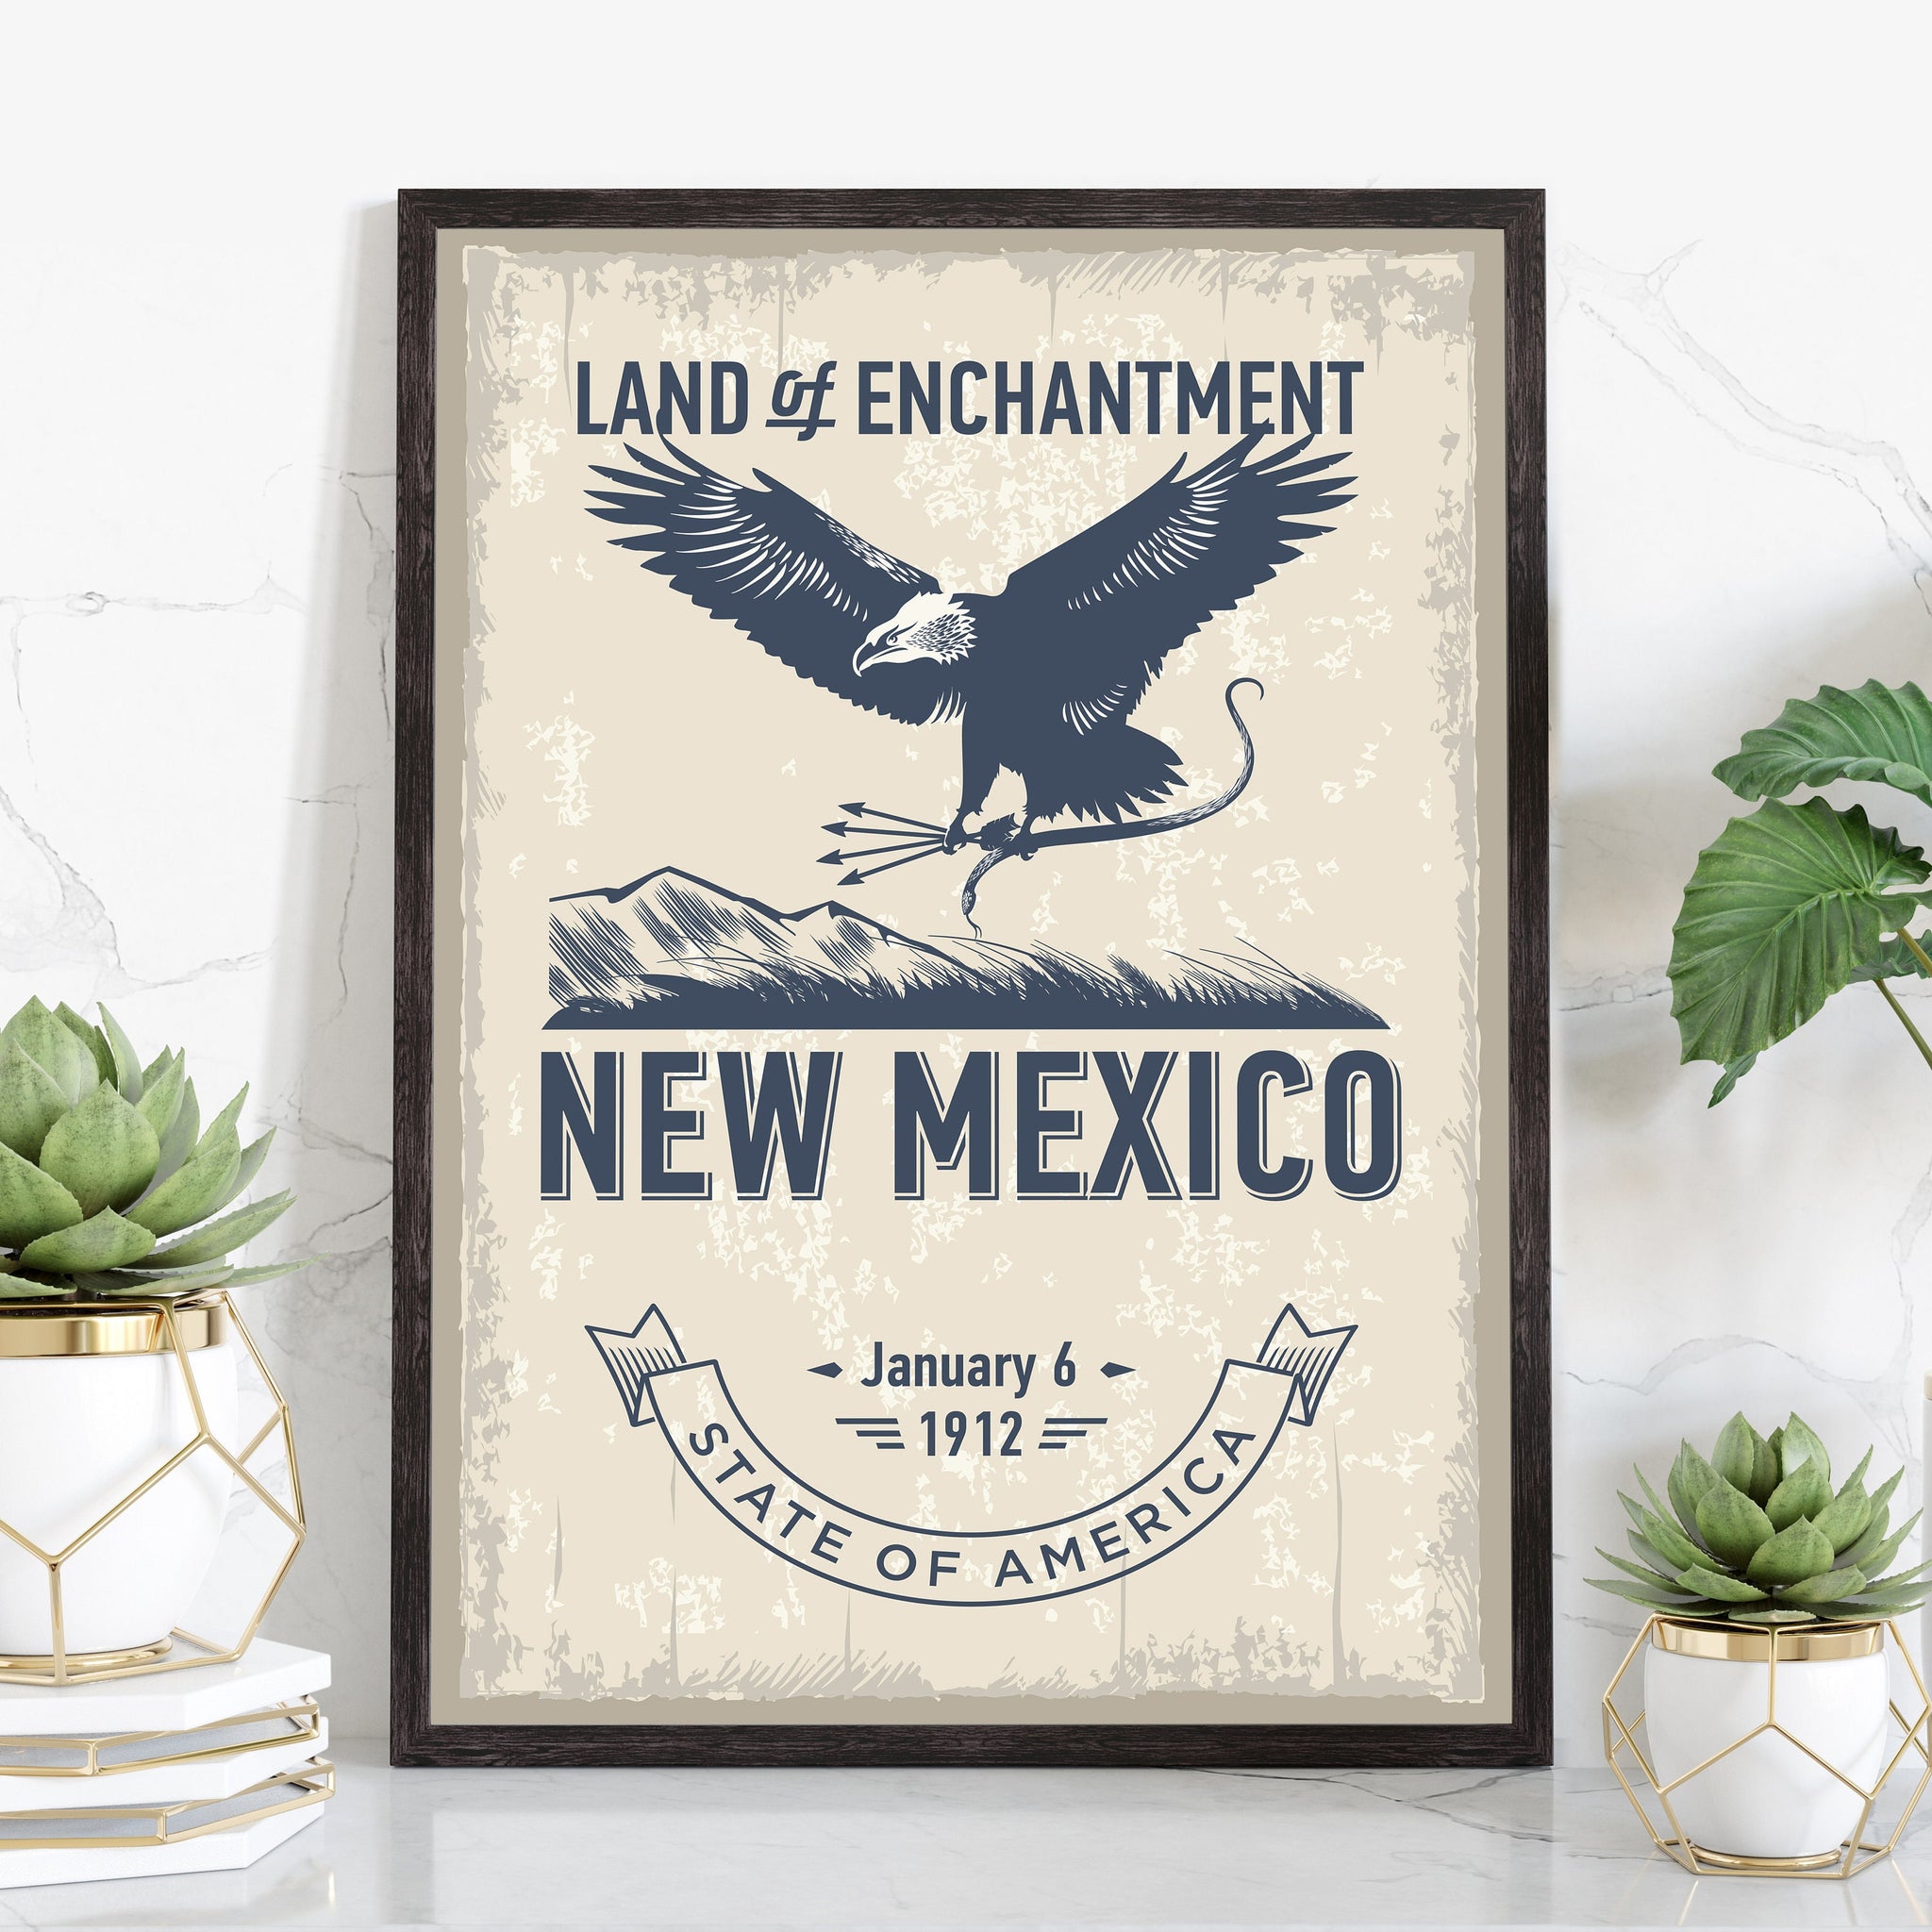 New Mexico State Symbol Poster, New Mexico State Poster Print, State Emblem Poster, Retro Travel State Poster, Home and Office Wall Art